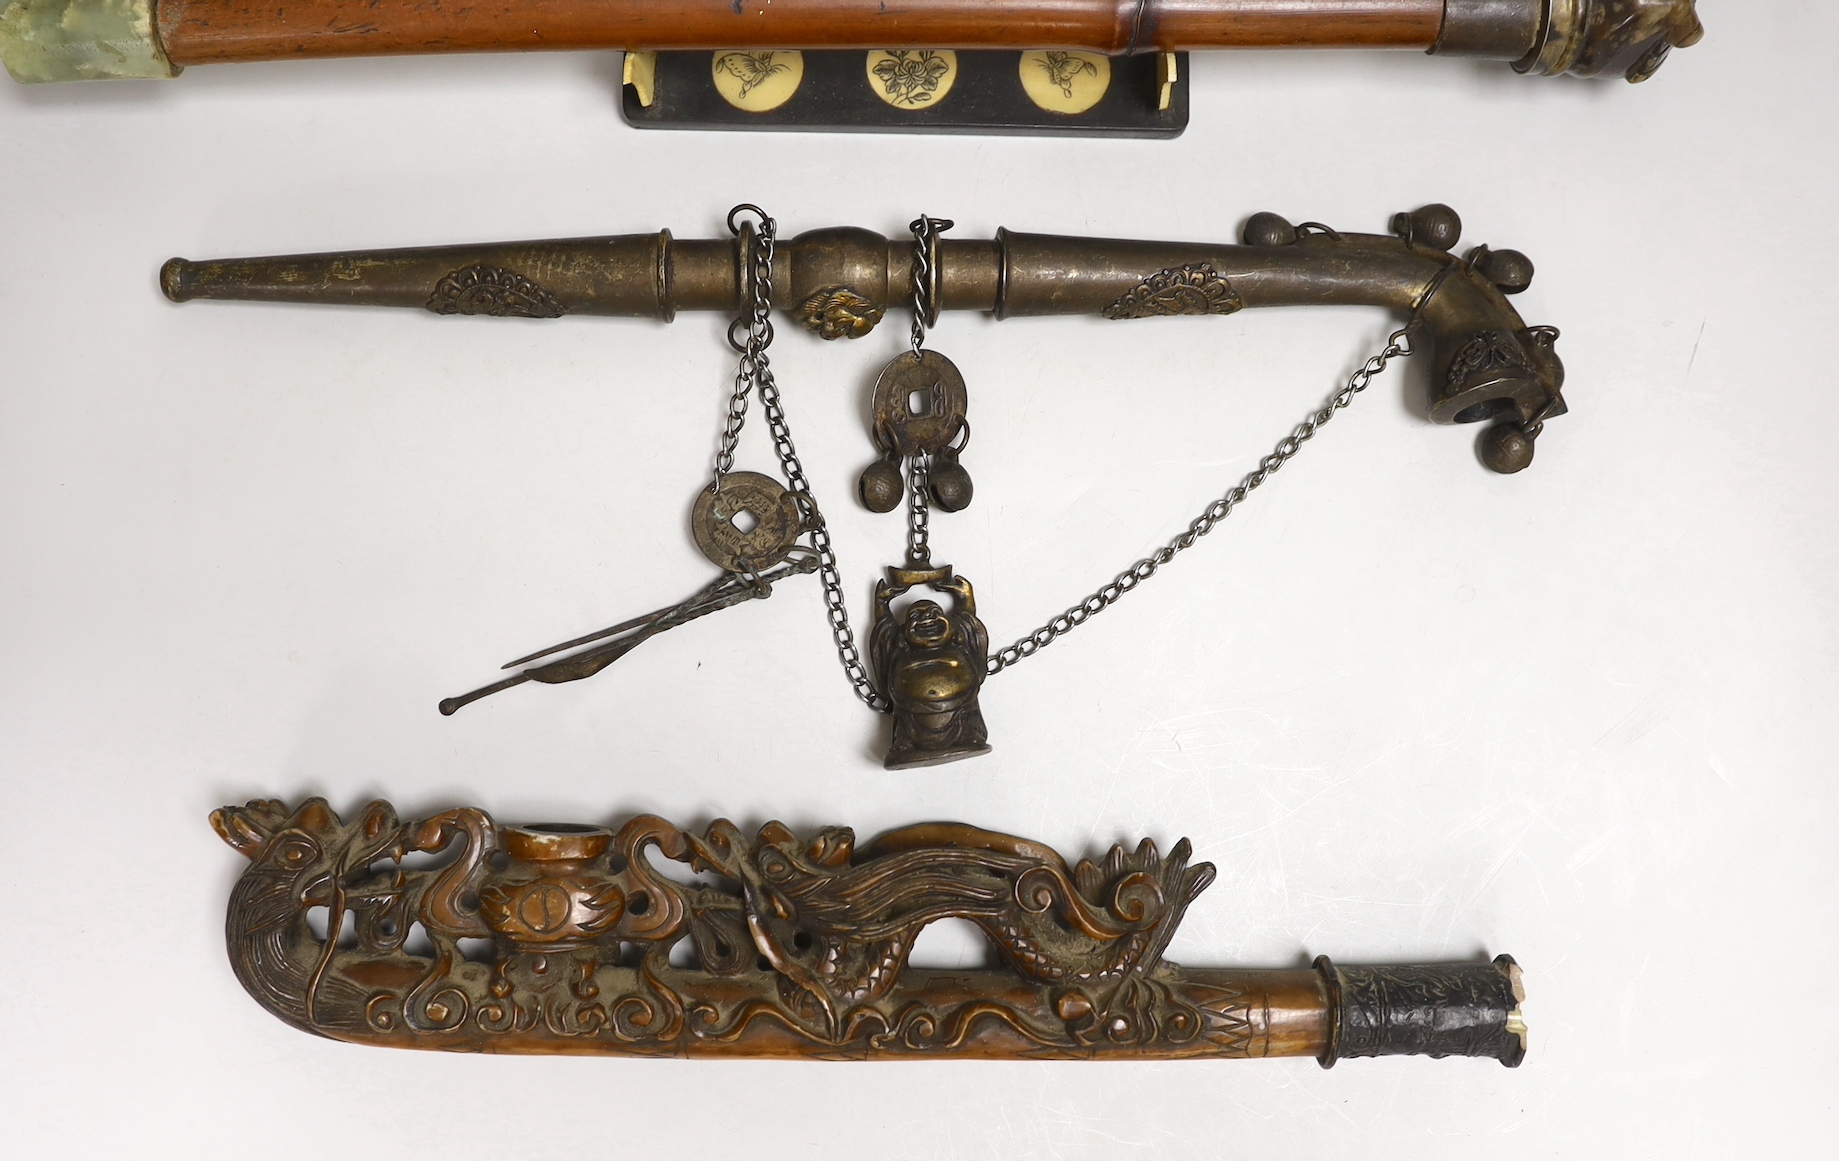 A collection of four Chinese or Indonesian opium pipes, 41.5cm long